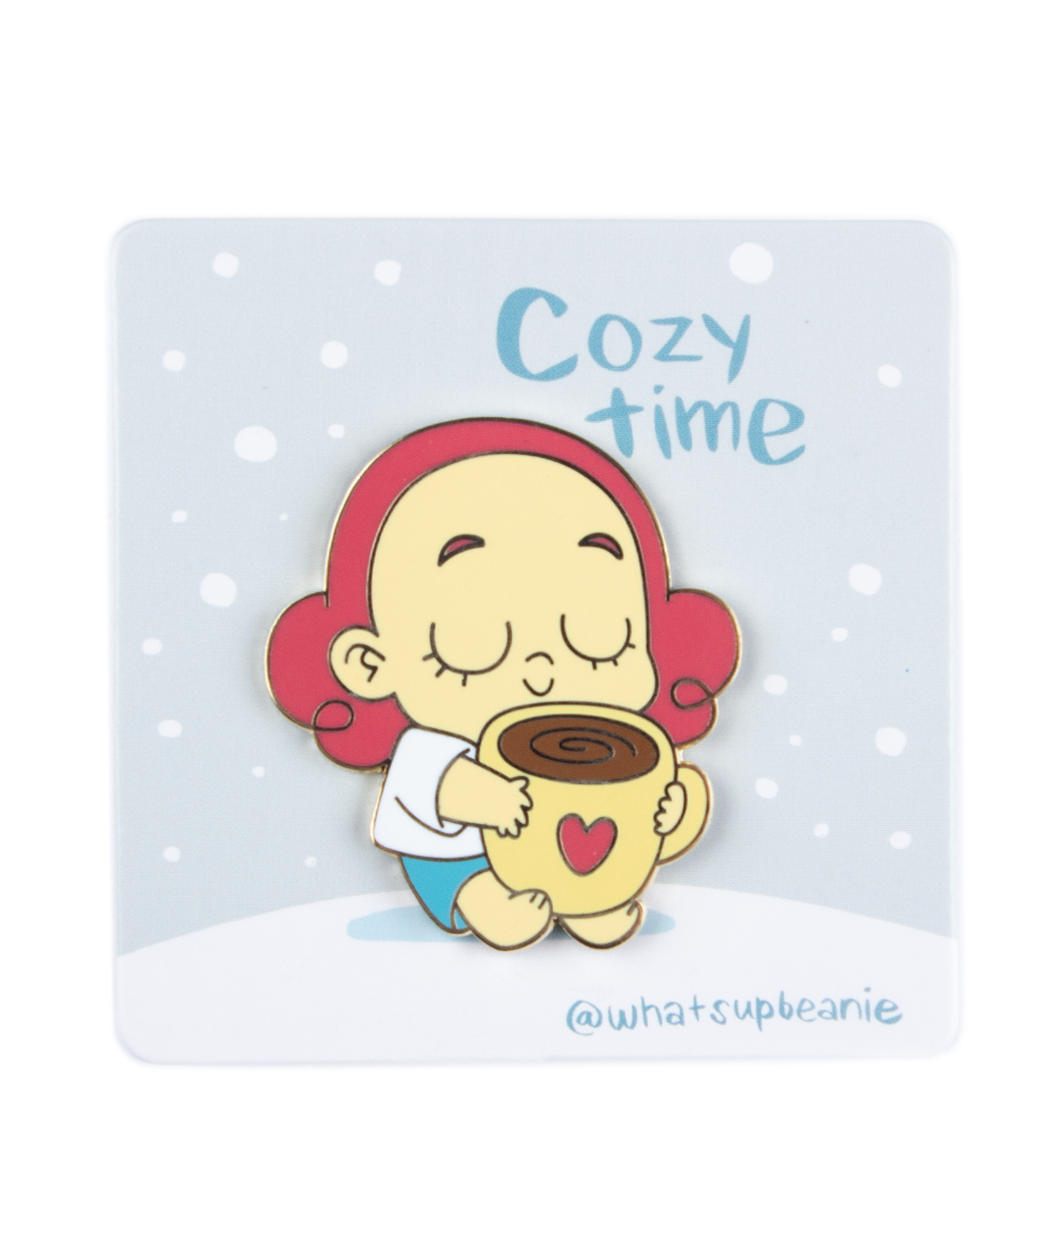 A pin of Beanie closing their eyes, with a smile holding a big mug of coffee with a heart on the front of the mug. The pin is on a card backing with falling snow and the words 